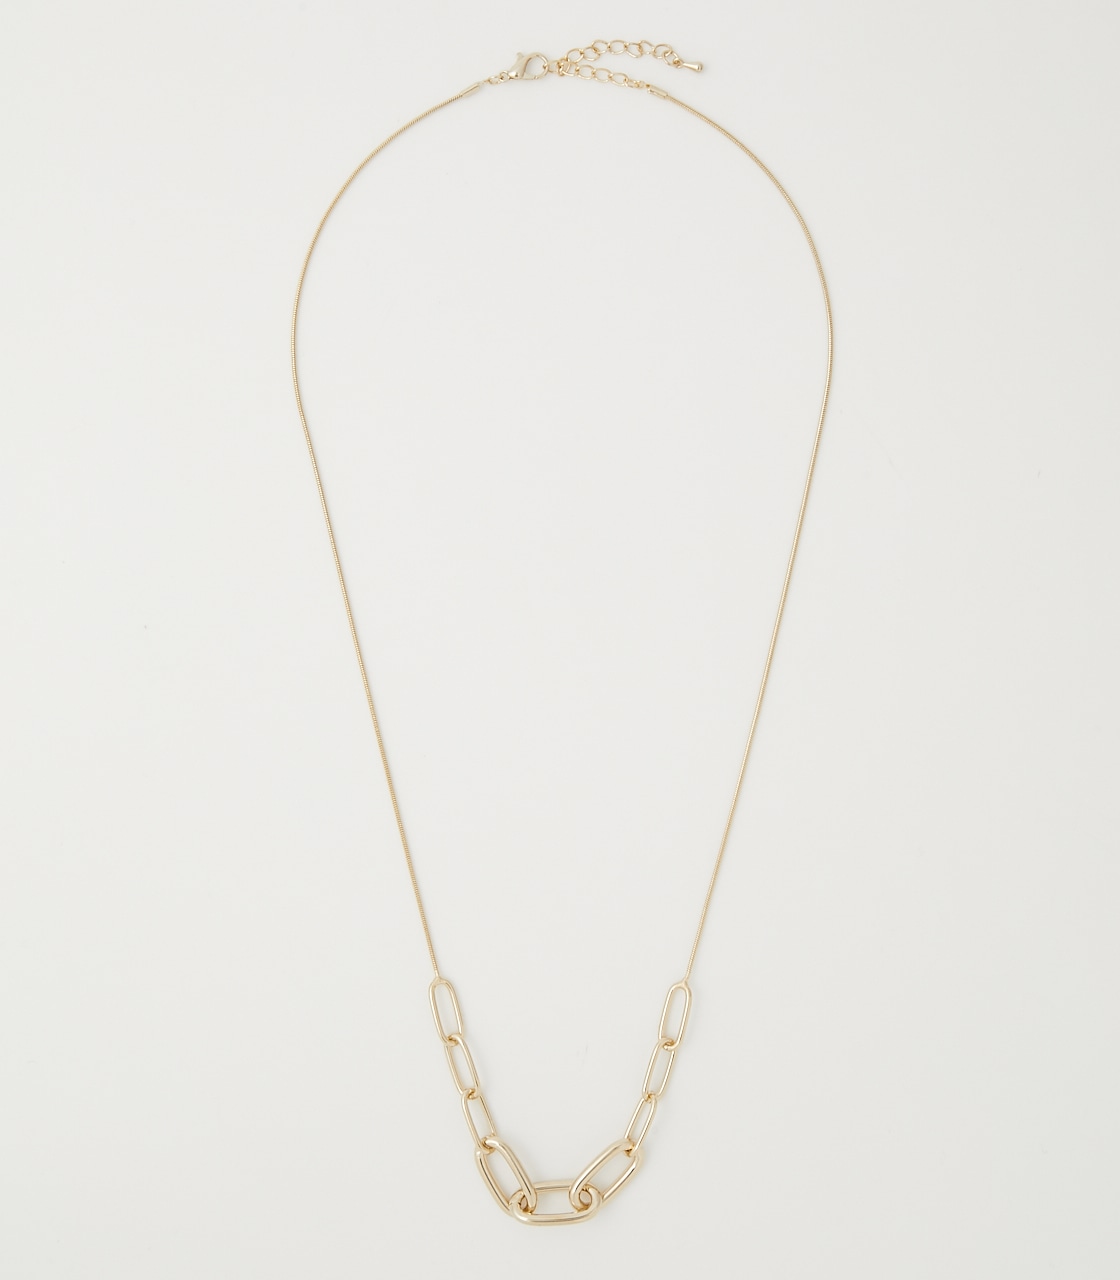 SYMMETRY CHAIN NECKLACE/シンメトリーチェーンネックレス 詳細画像 L/GLD 1